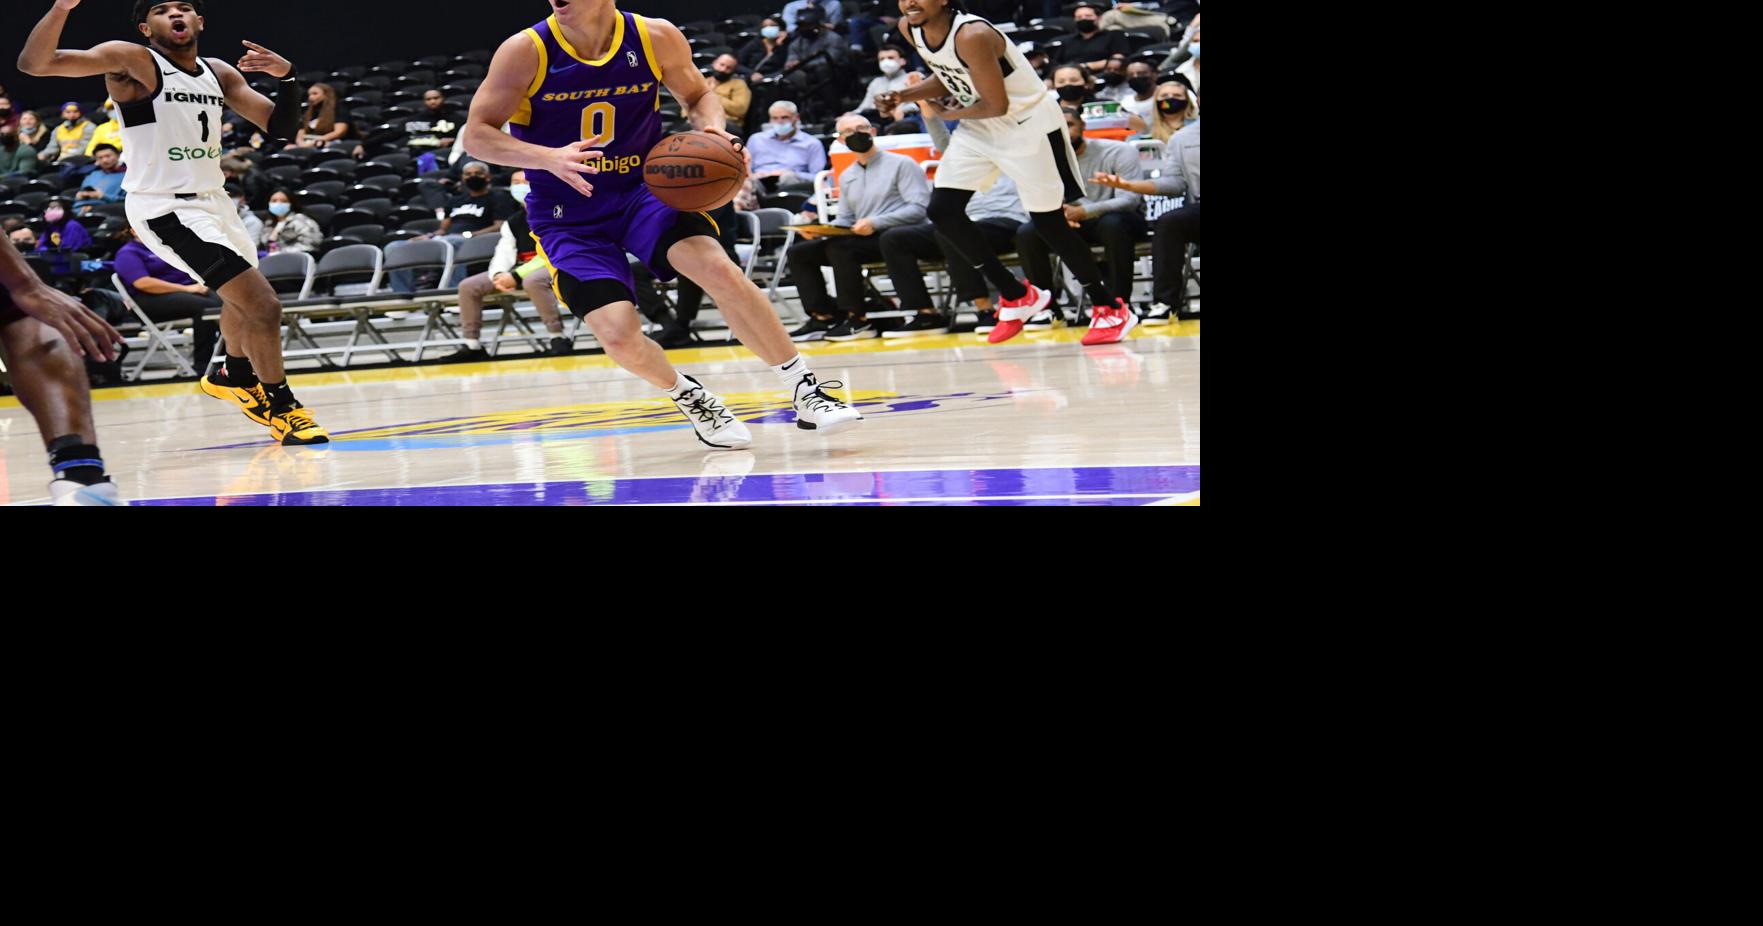 Mac McClung (Gate City) magnificent in debut for G League's South Bay Lakers